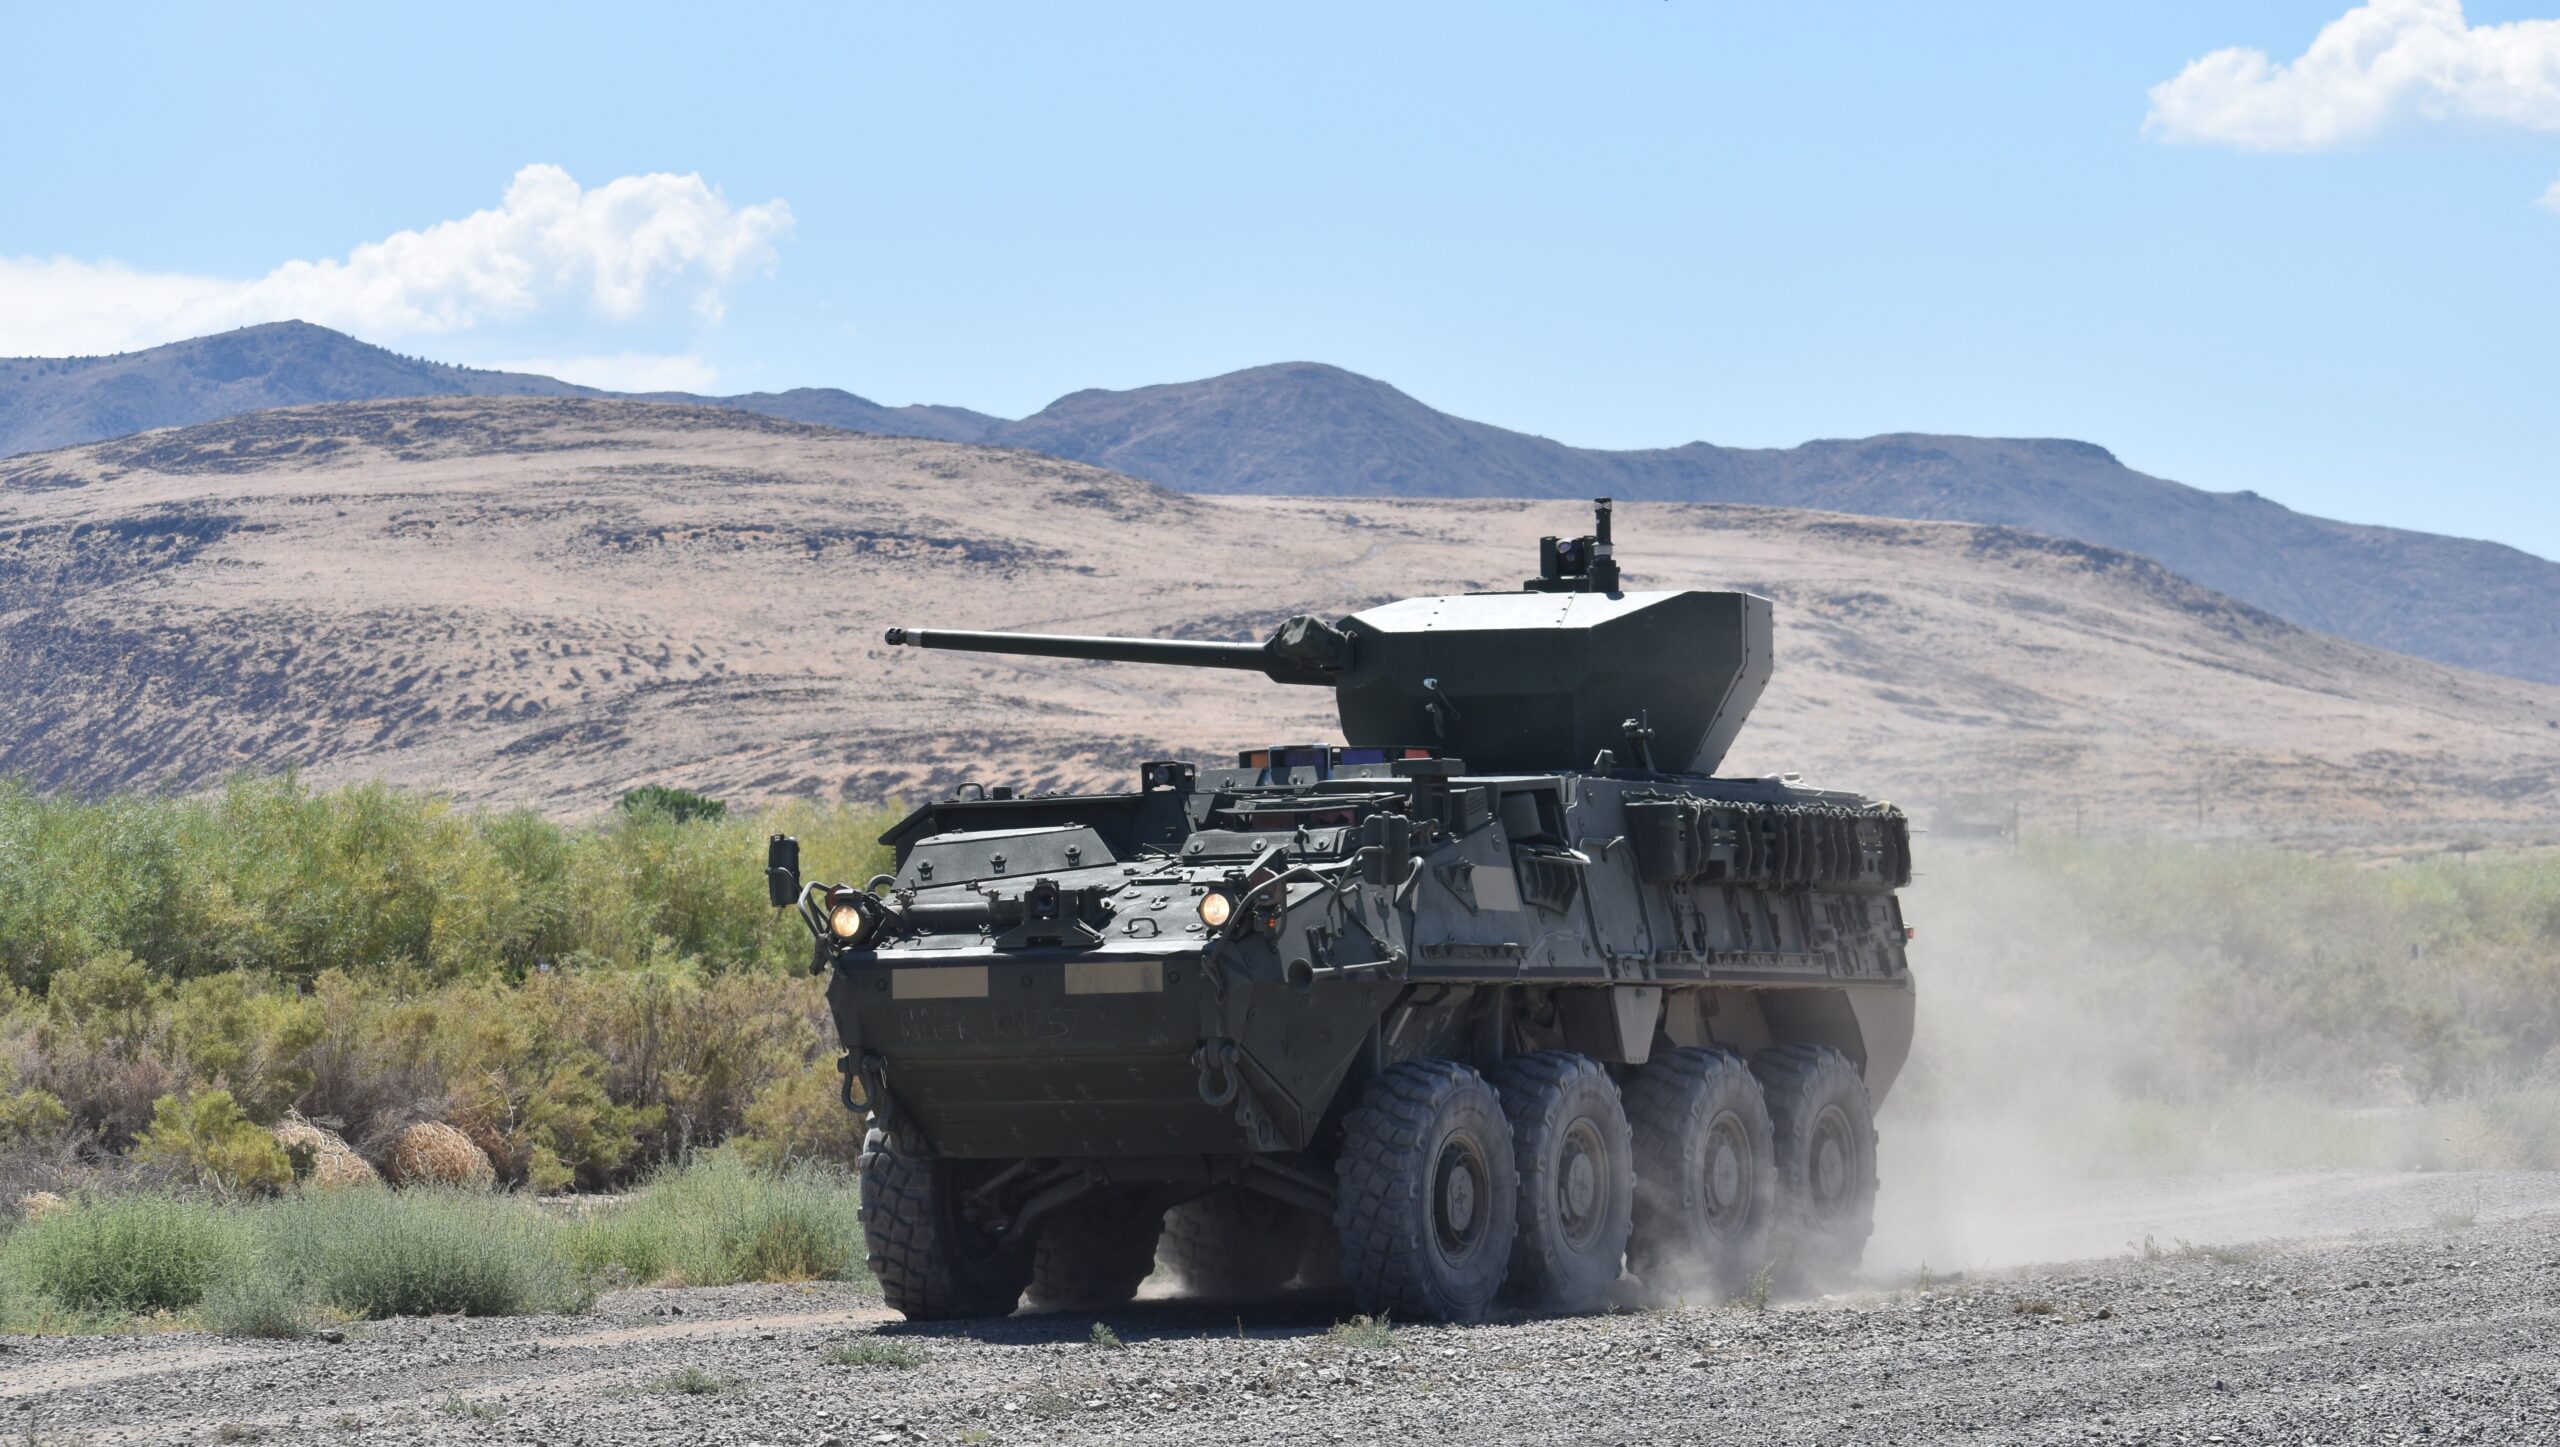 Upgunned Stryker’s software problems ‘resolved,’ says Army two-star